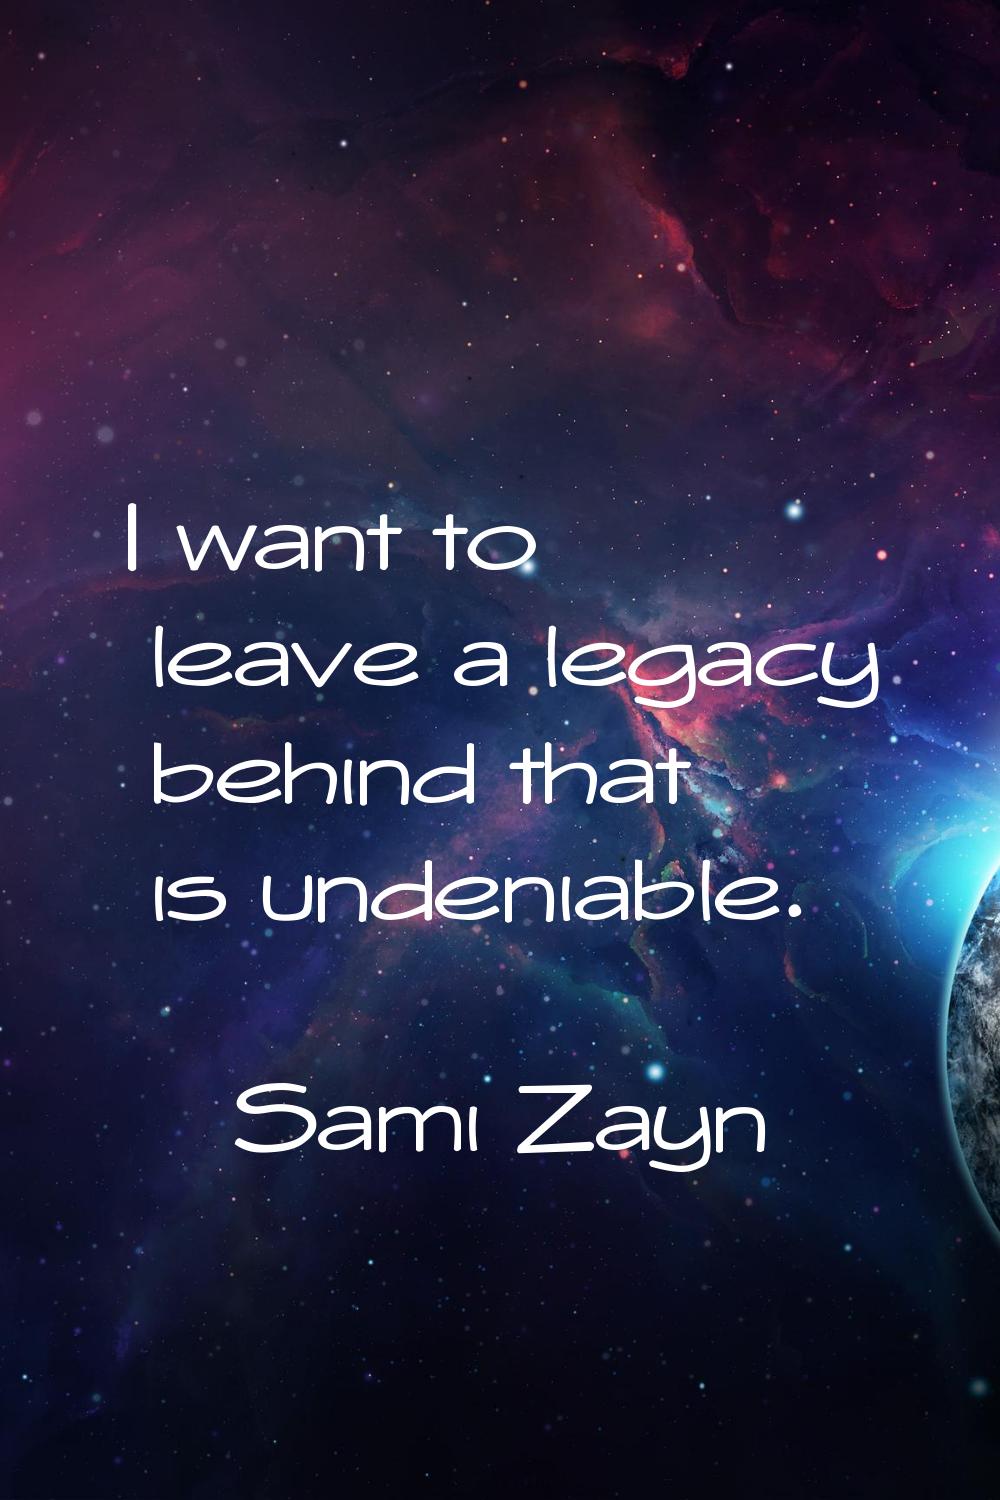 I want to leave a legacy behind that is undeniable.